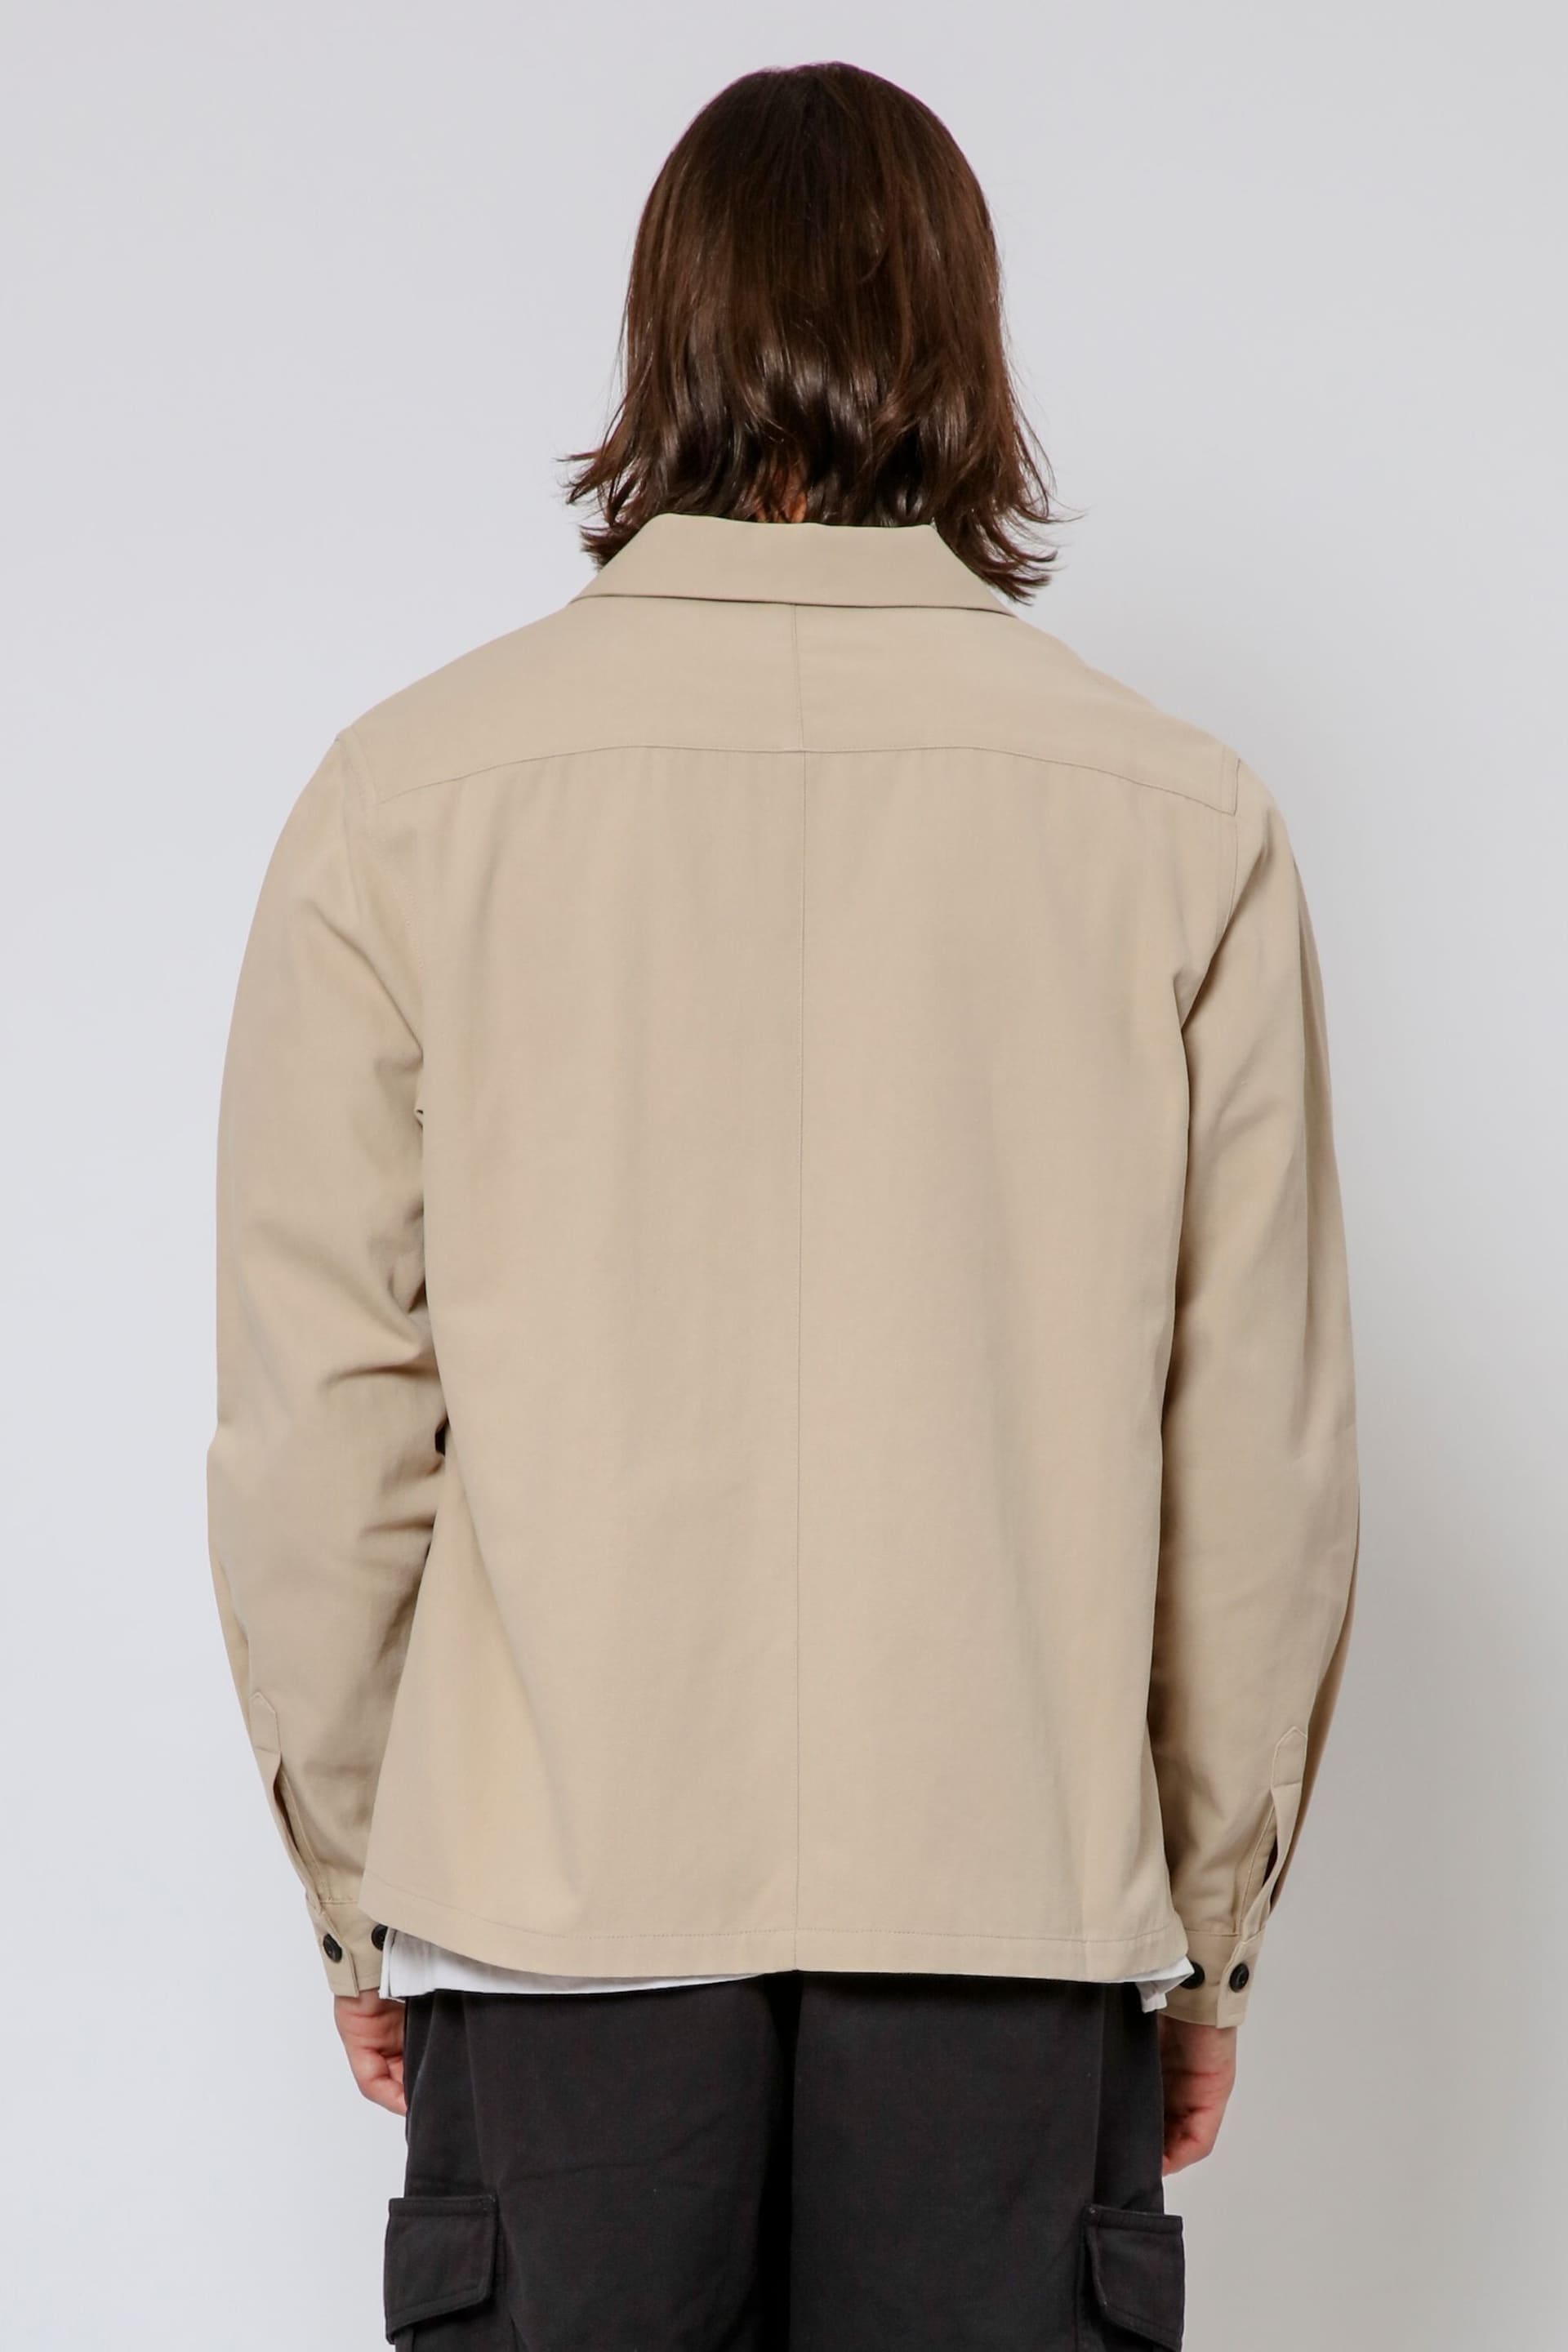 Religion Brown Button Up Drill Overshirt - Image 2 of 4